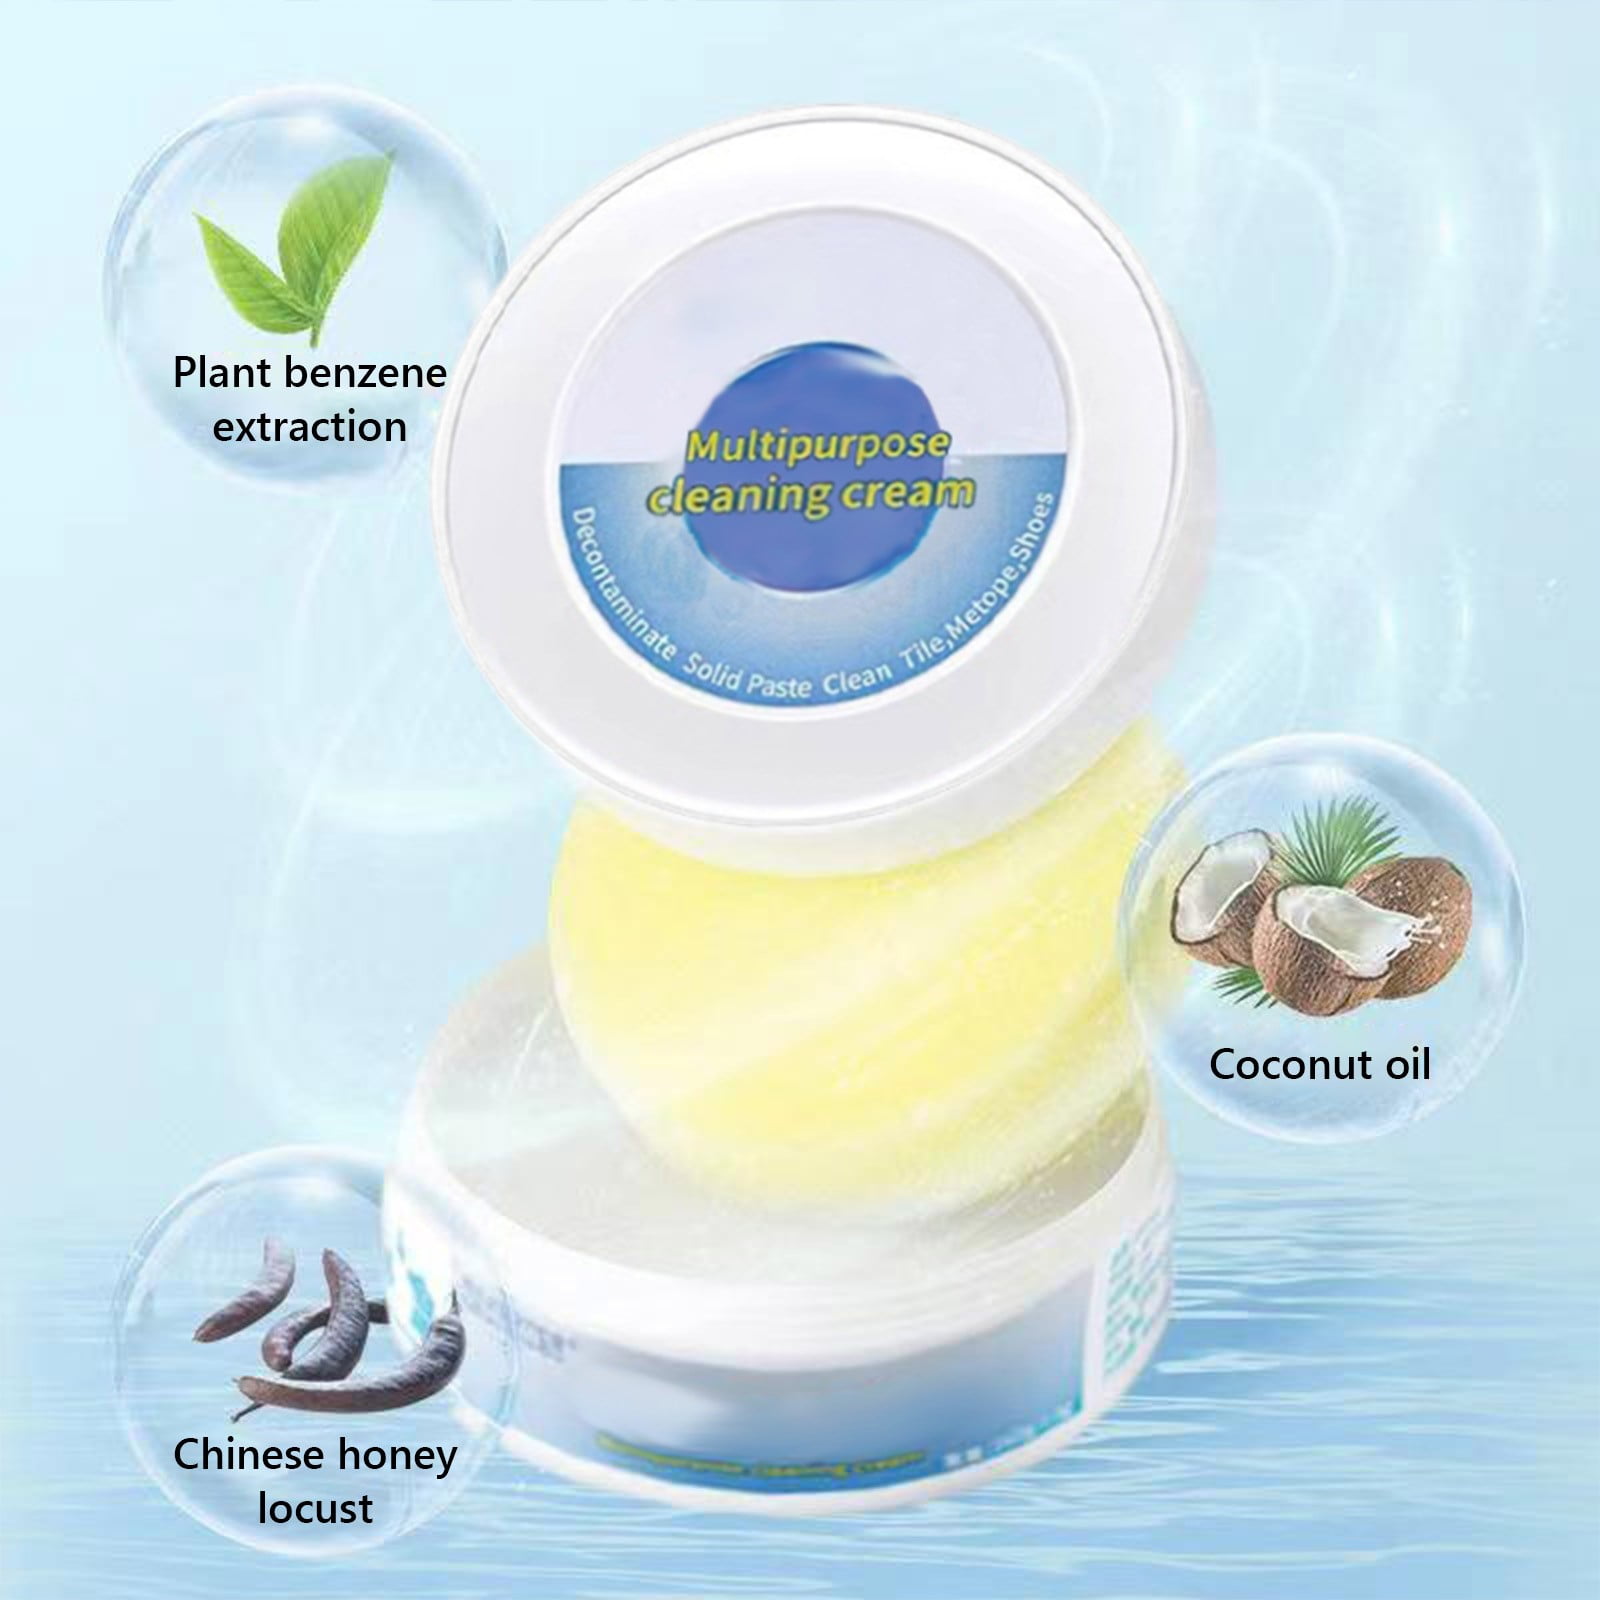 Jue Fish Cleaning Cream, Multipurpose Cleaning Cream, Multi-Functional  Cleaning and Stain Removal Cream, Multi Purpose Cleaning Cream, Cleaning  Cream